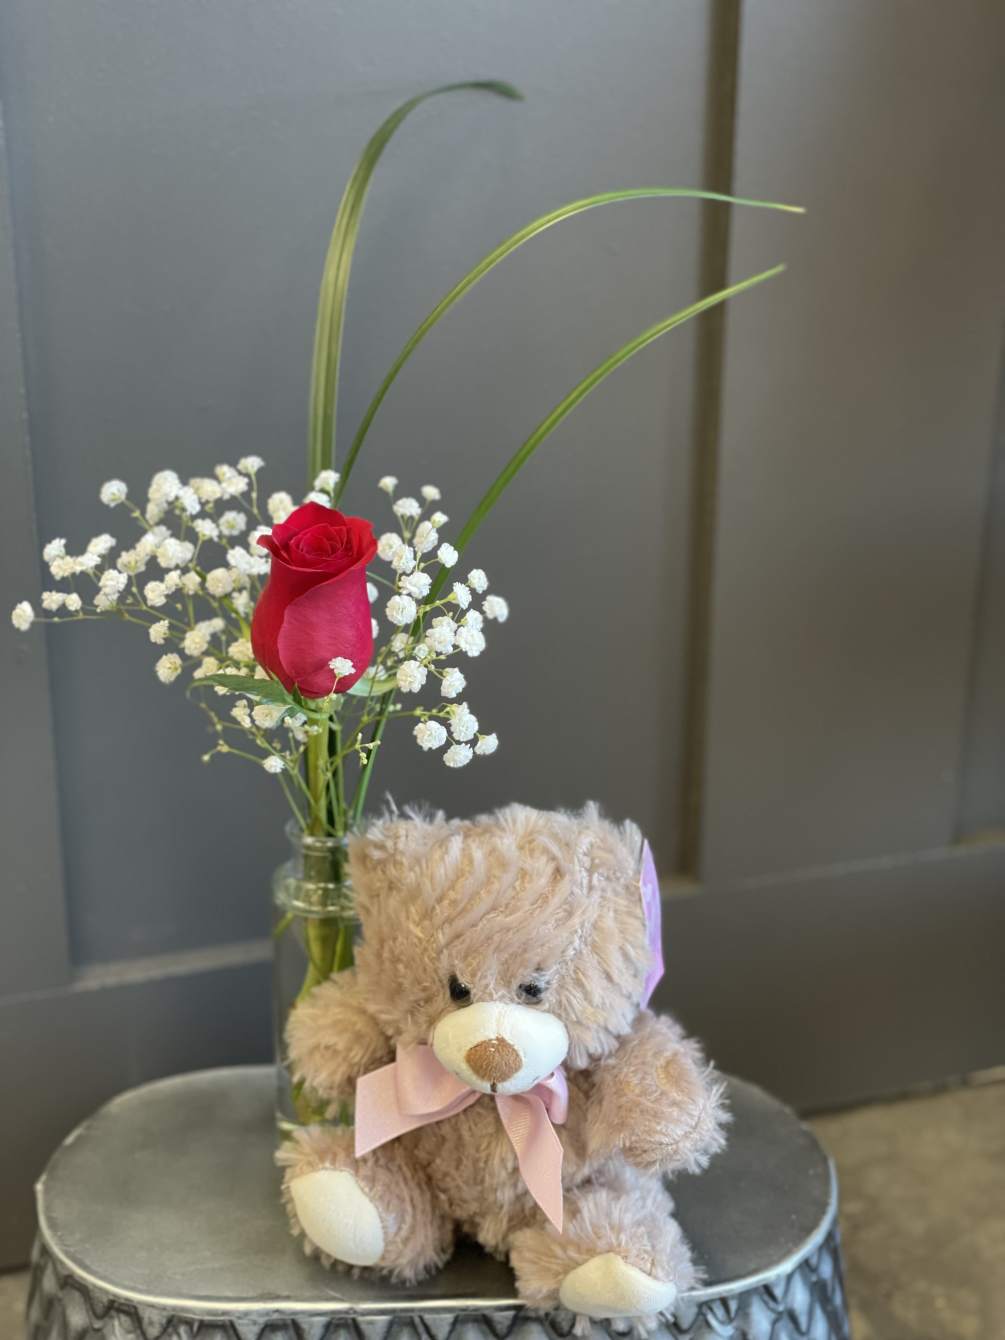 Send a smile and a hug with this adorable arrangement and snuggly